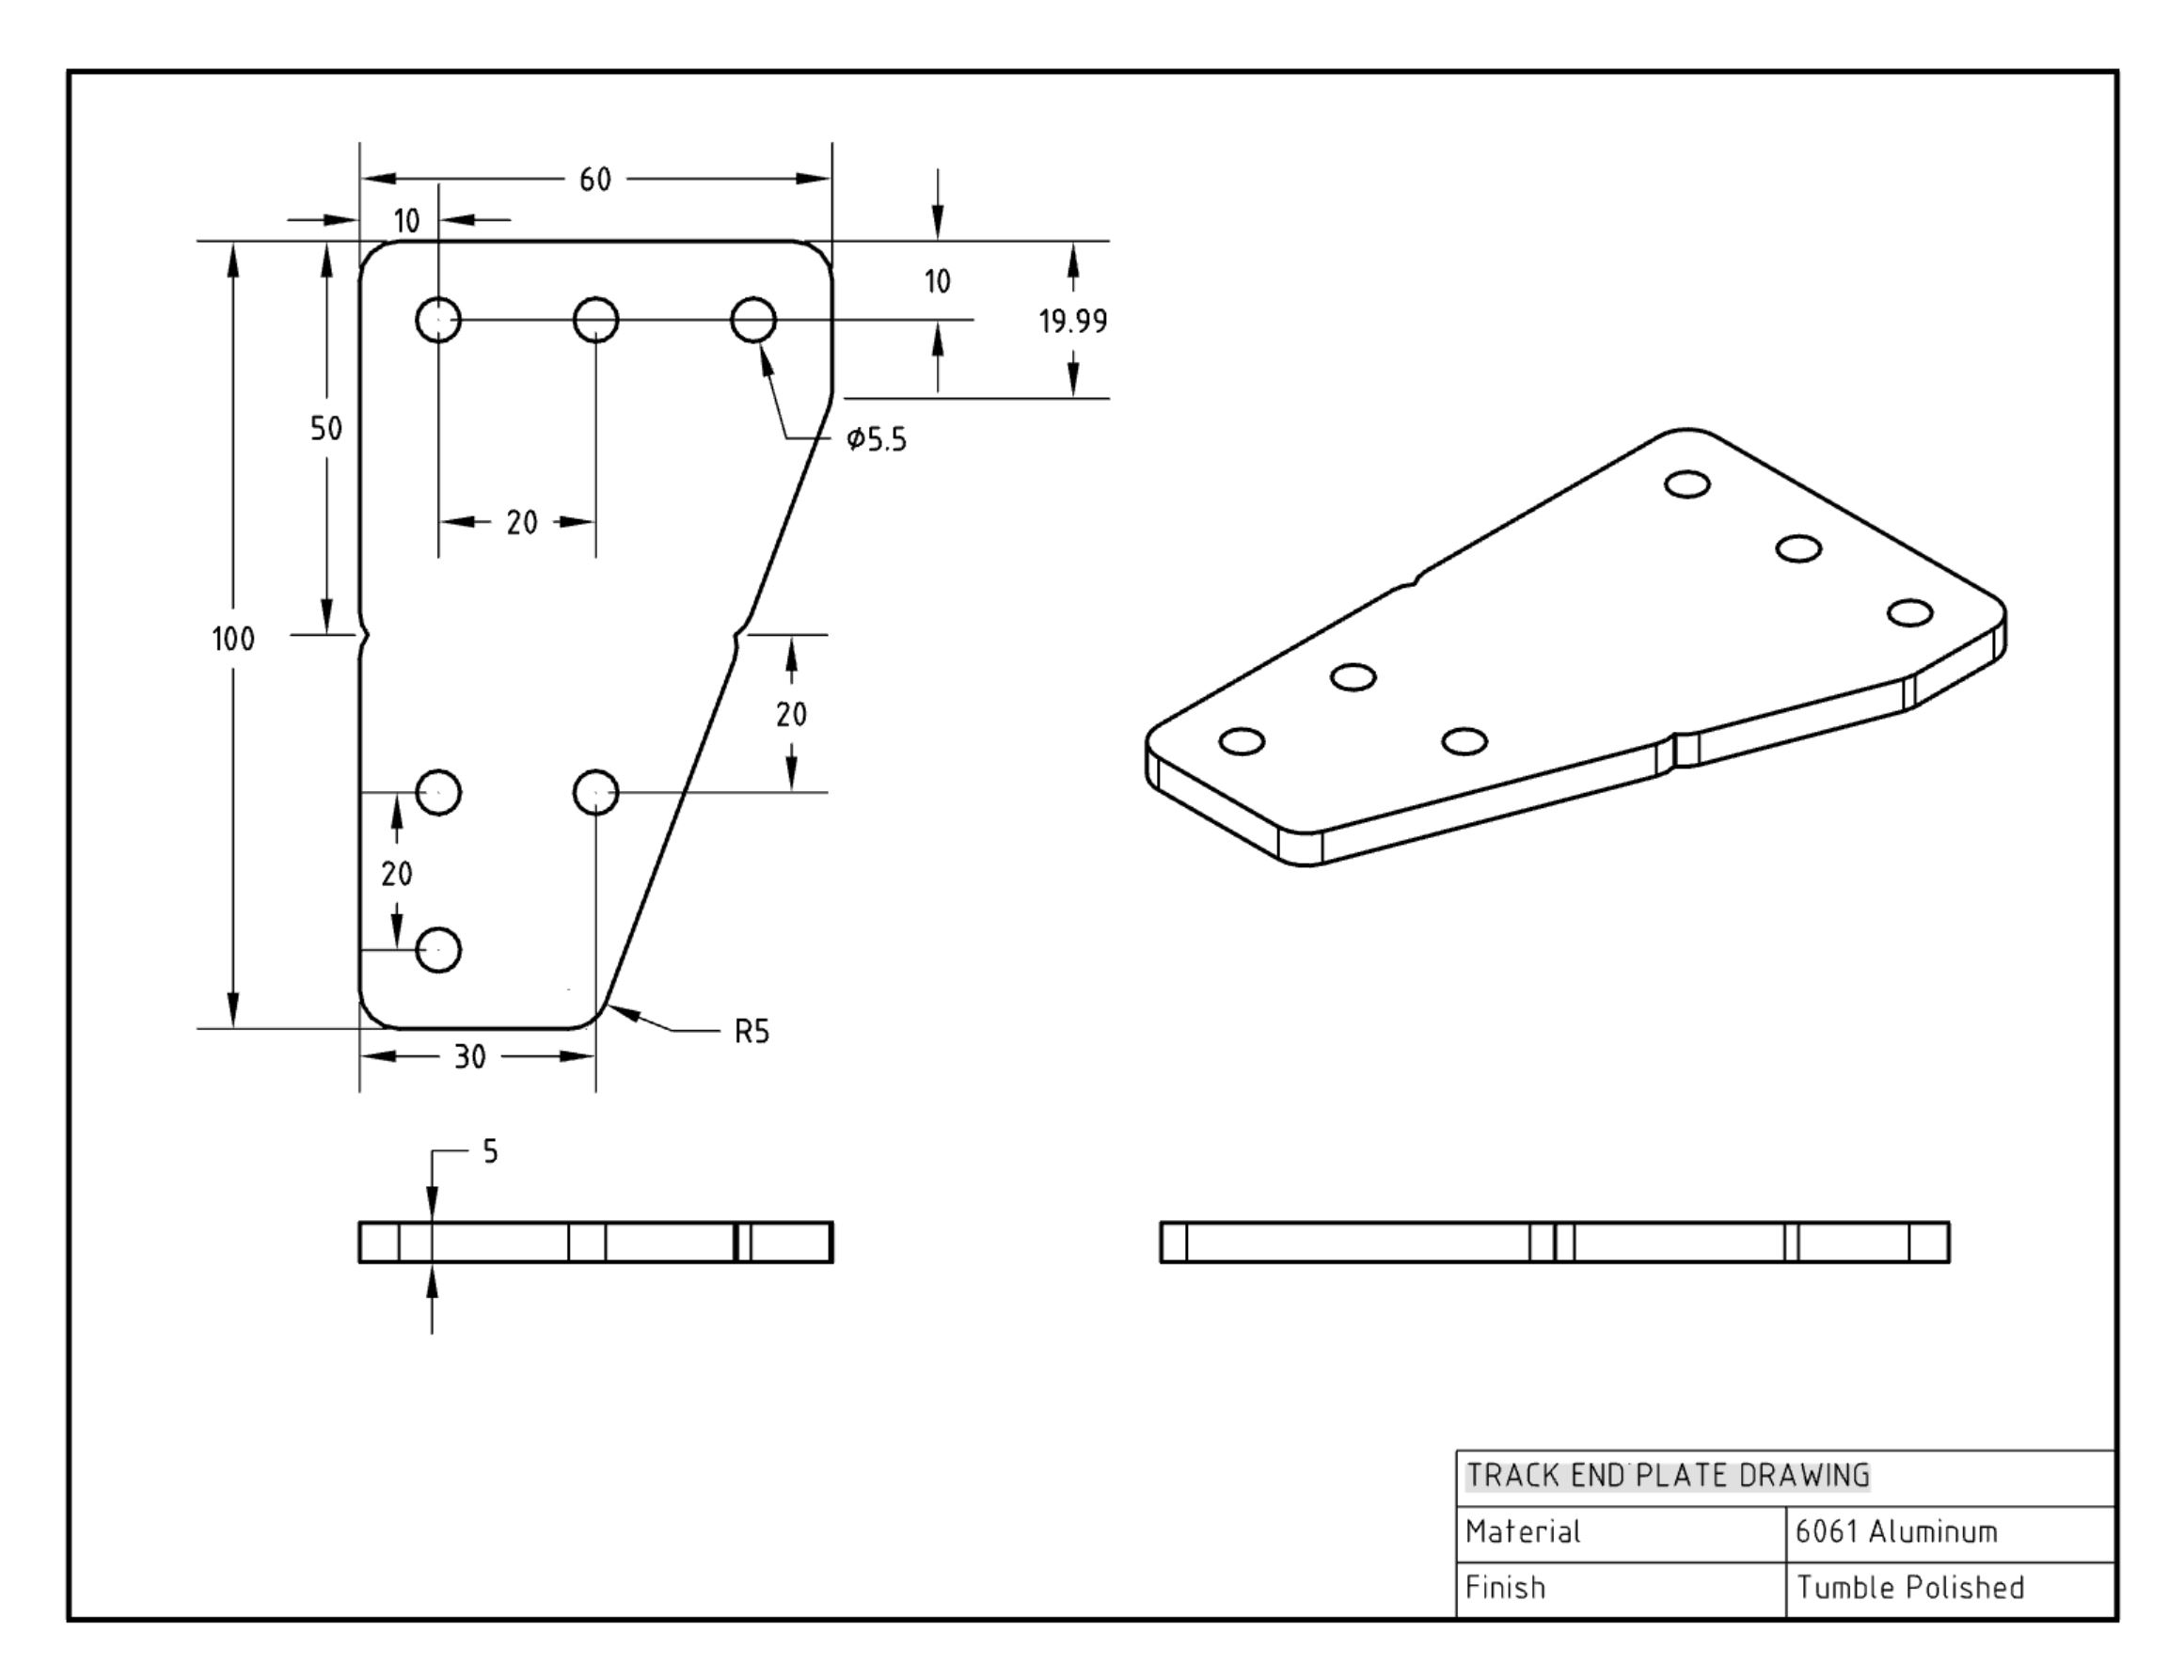 Track End Plate Drawing.JPG